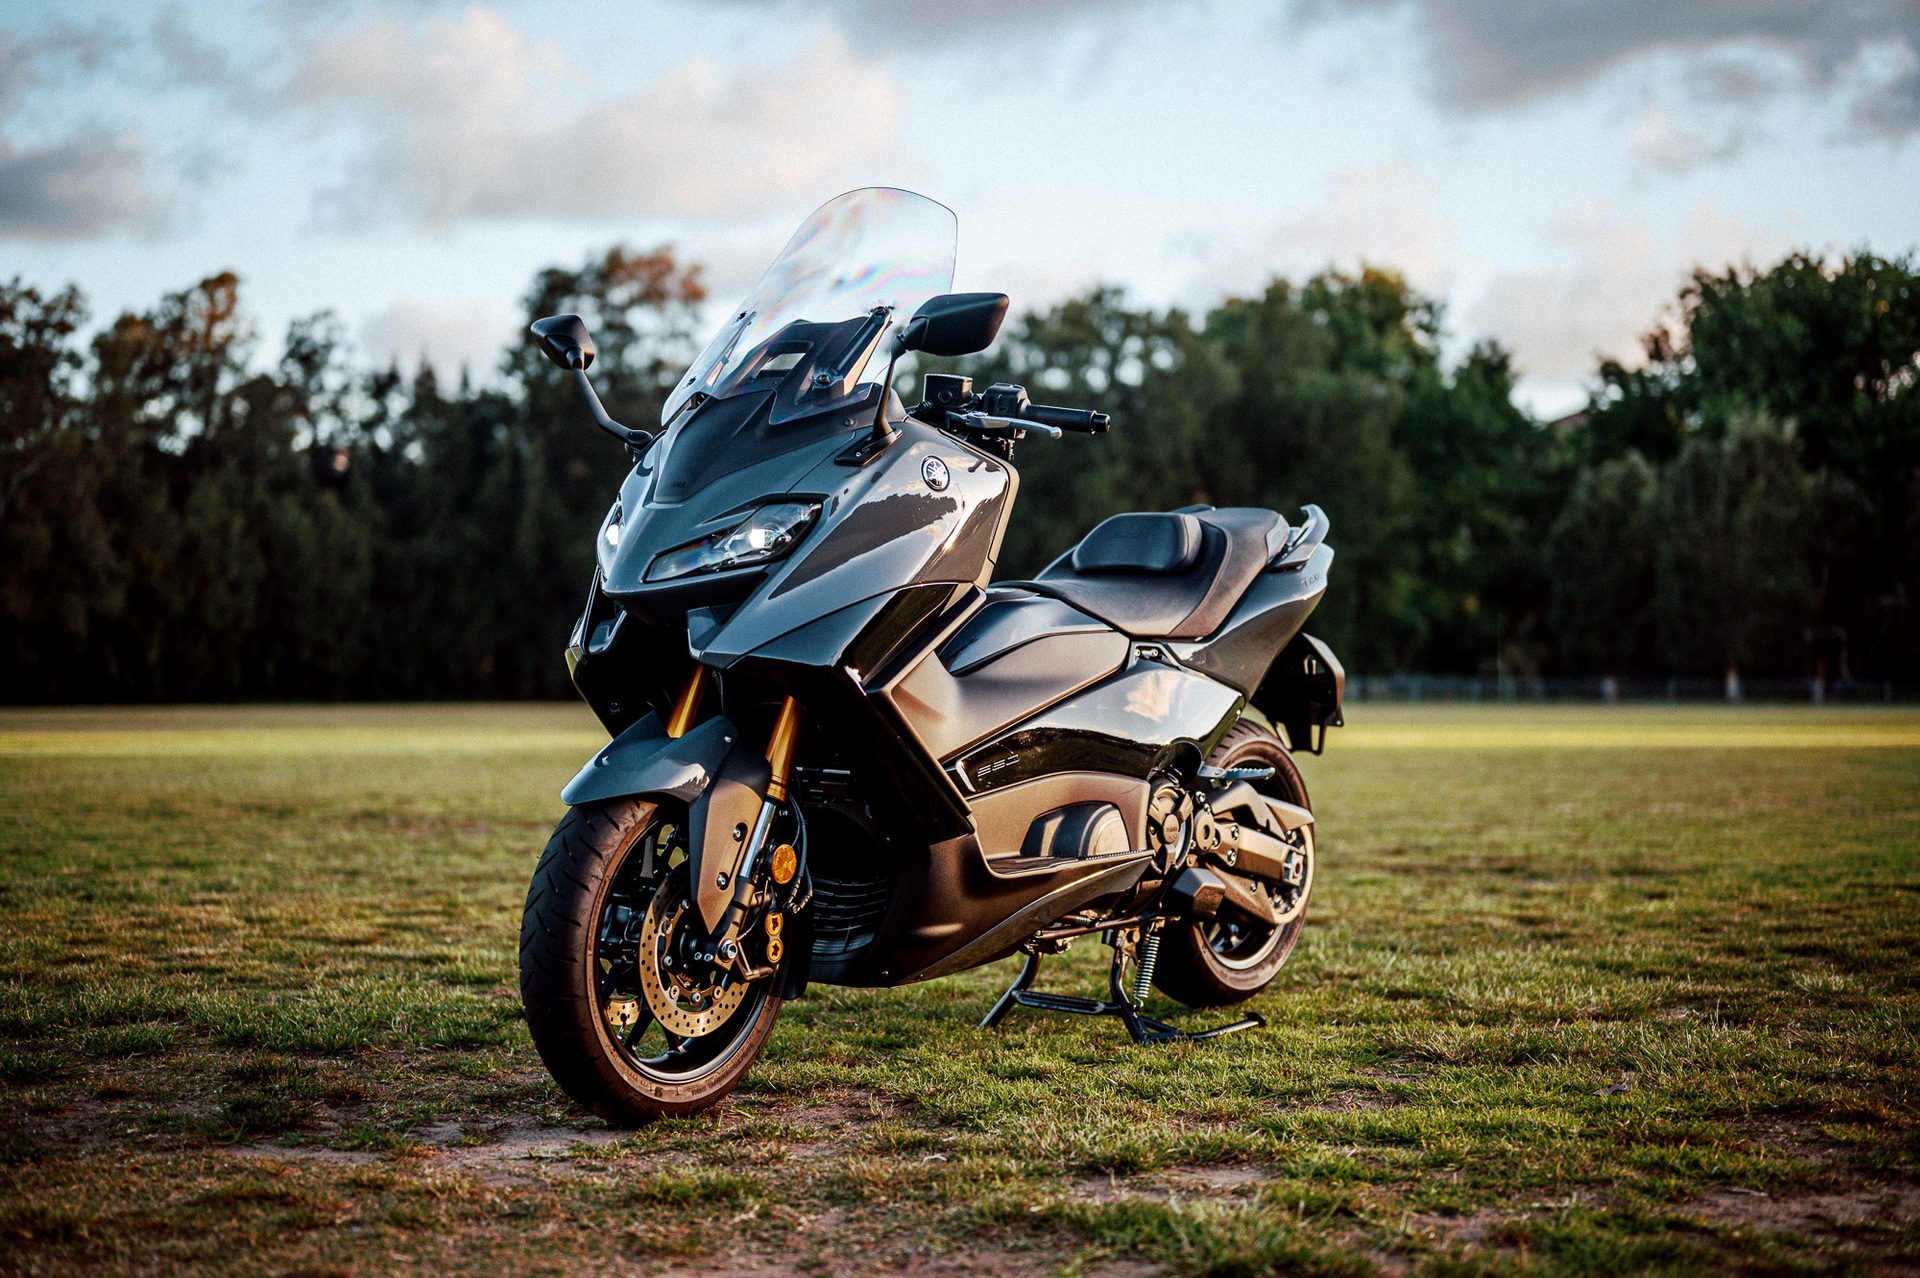 Review: The 2020 Yamaha TMAX 560